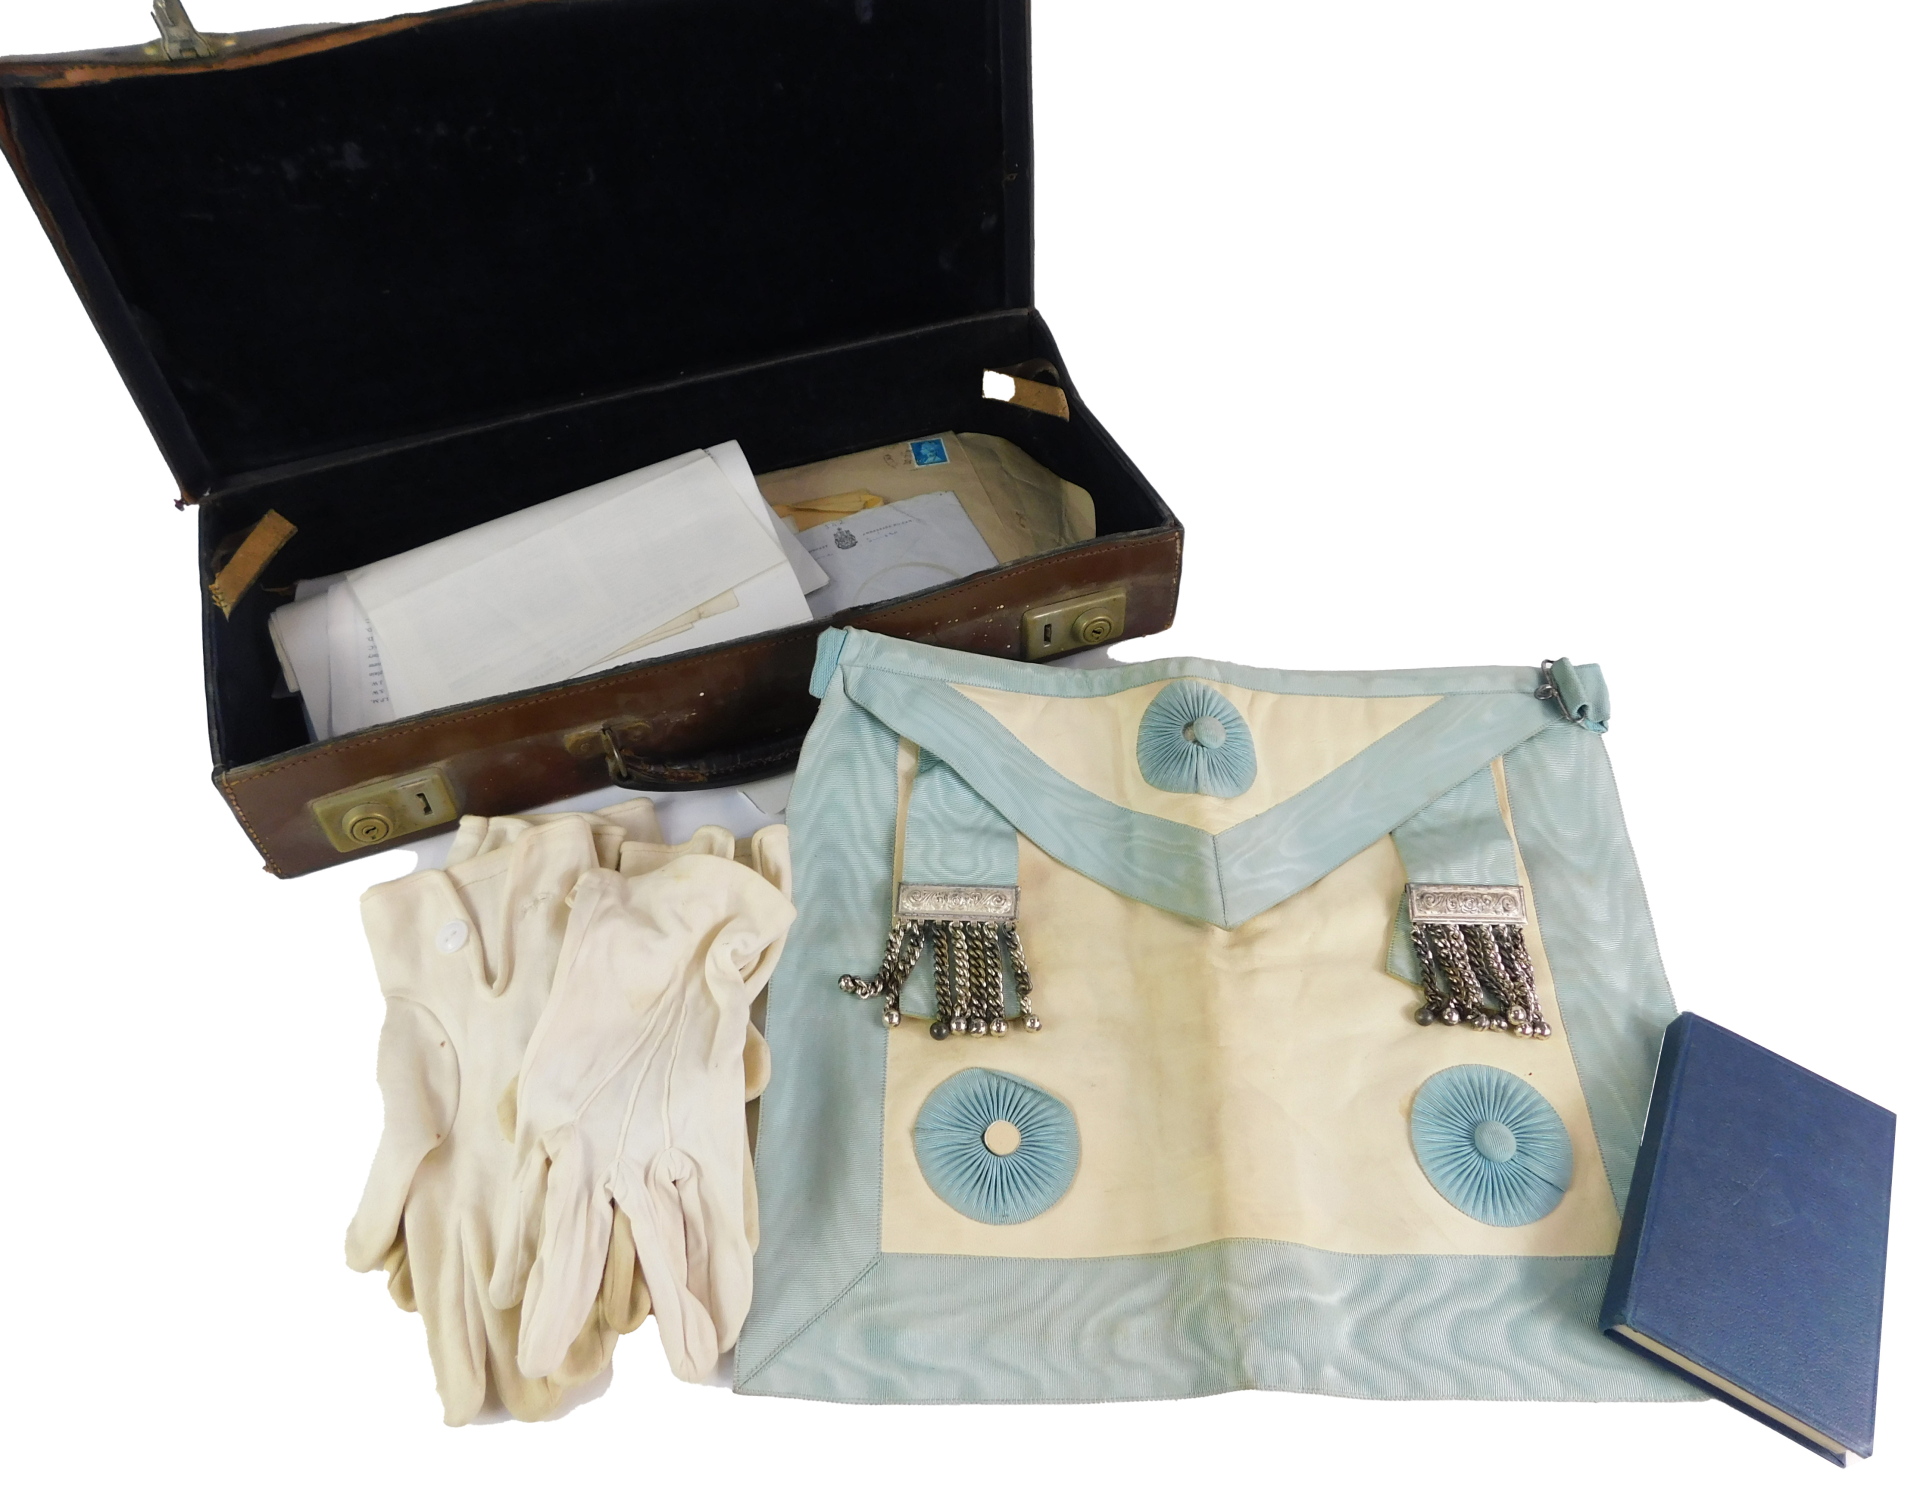 A leather case containing Masonic related items, aprons etc.